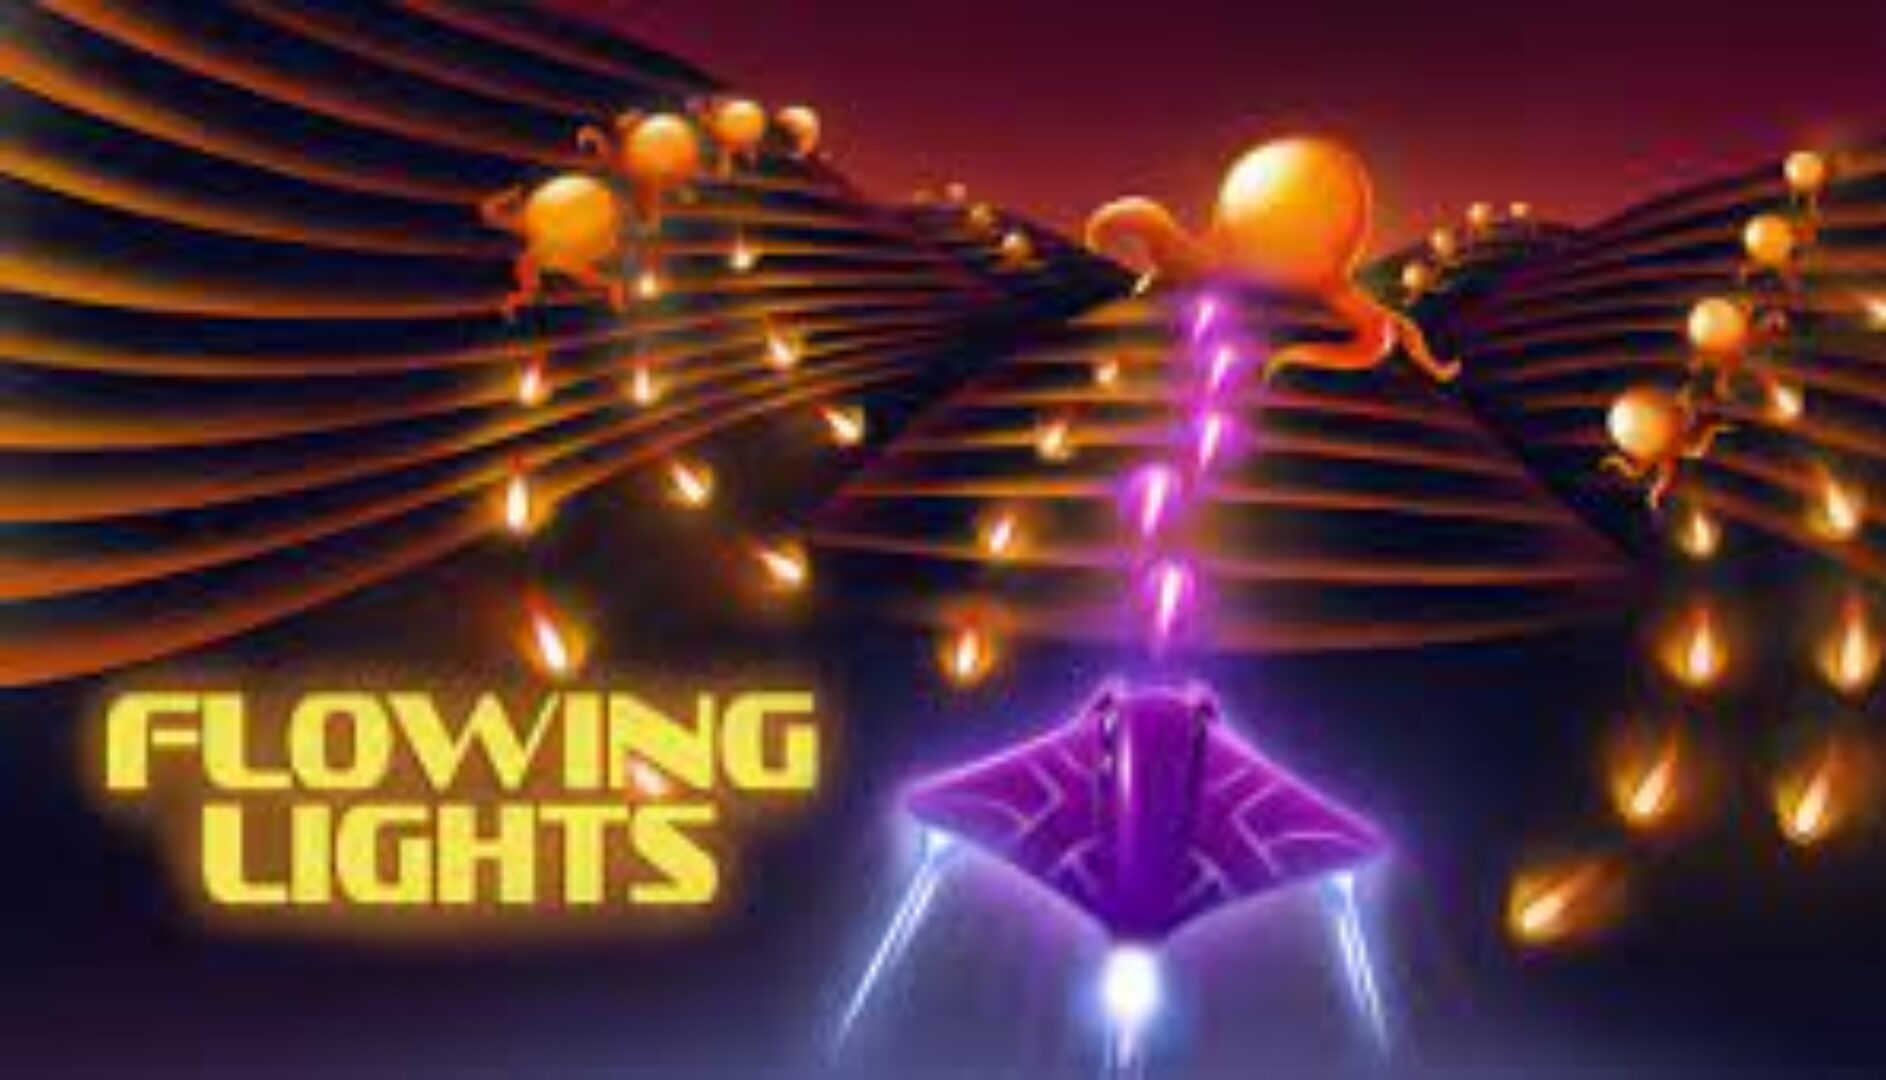 Flowing Lights! Out Now on Switch, Xbox, and Steam